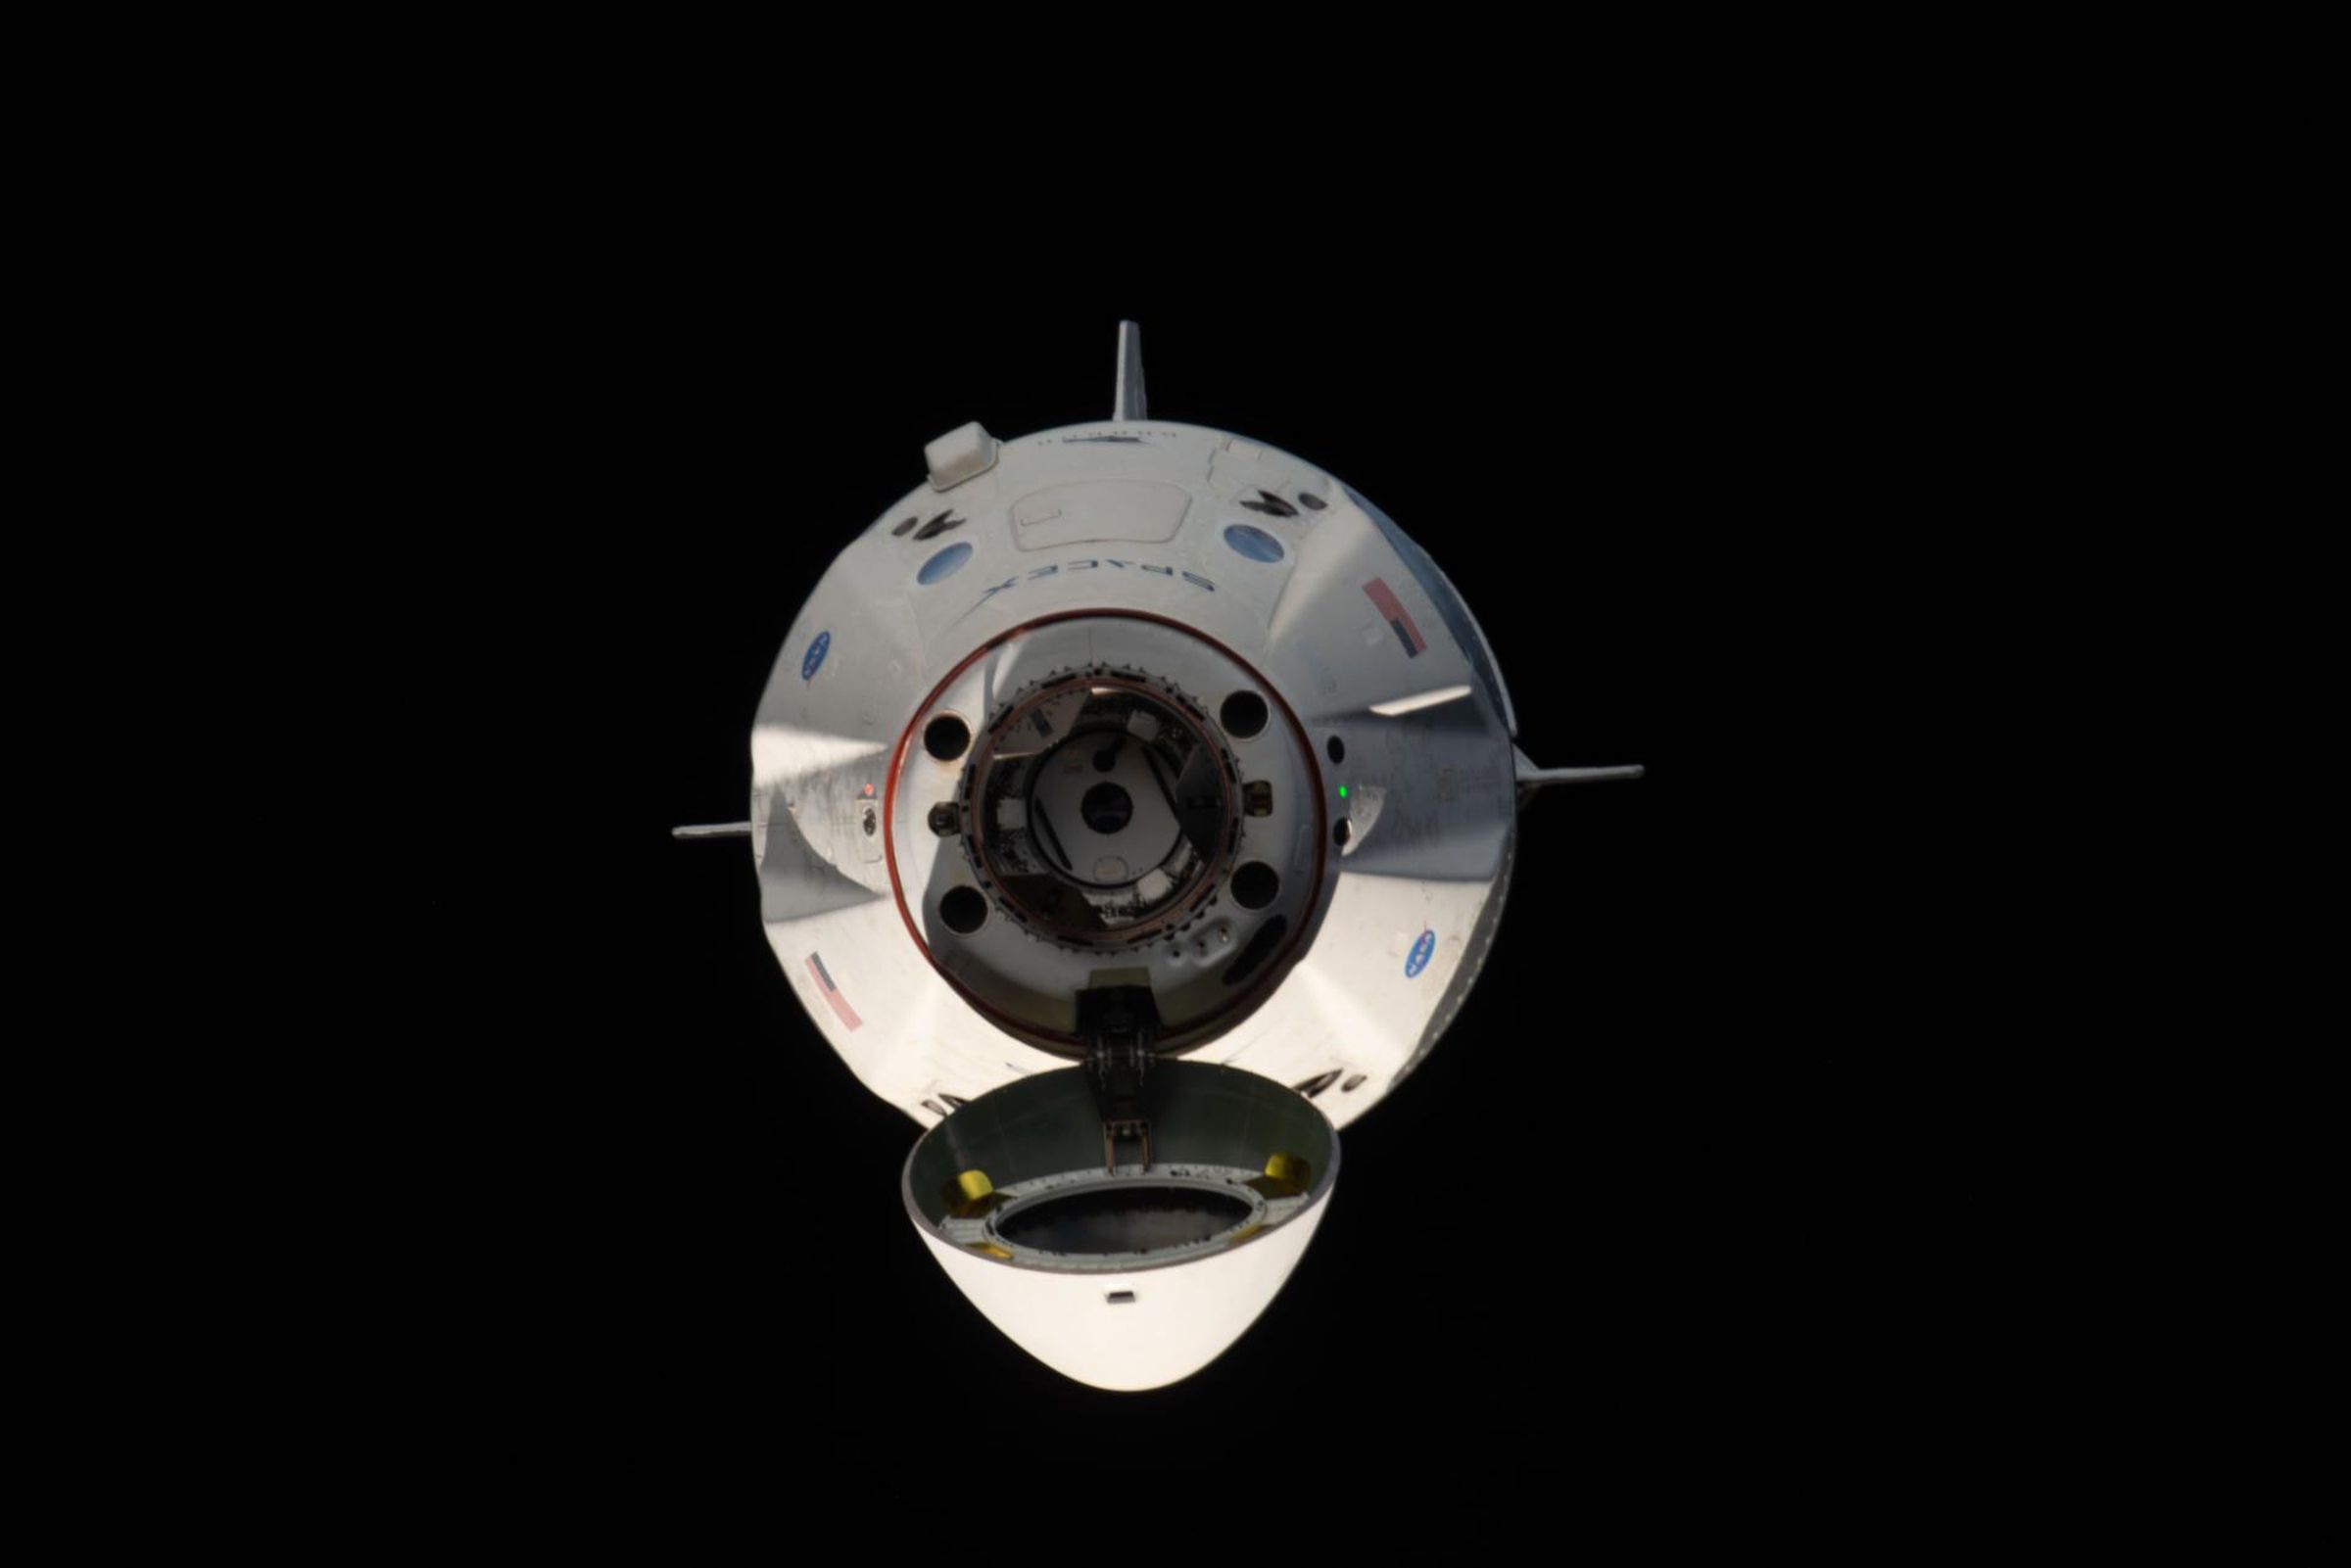 SpaceX’s Crew Dragon approaching the International Space Station during its first test flight in 2019.